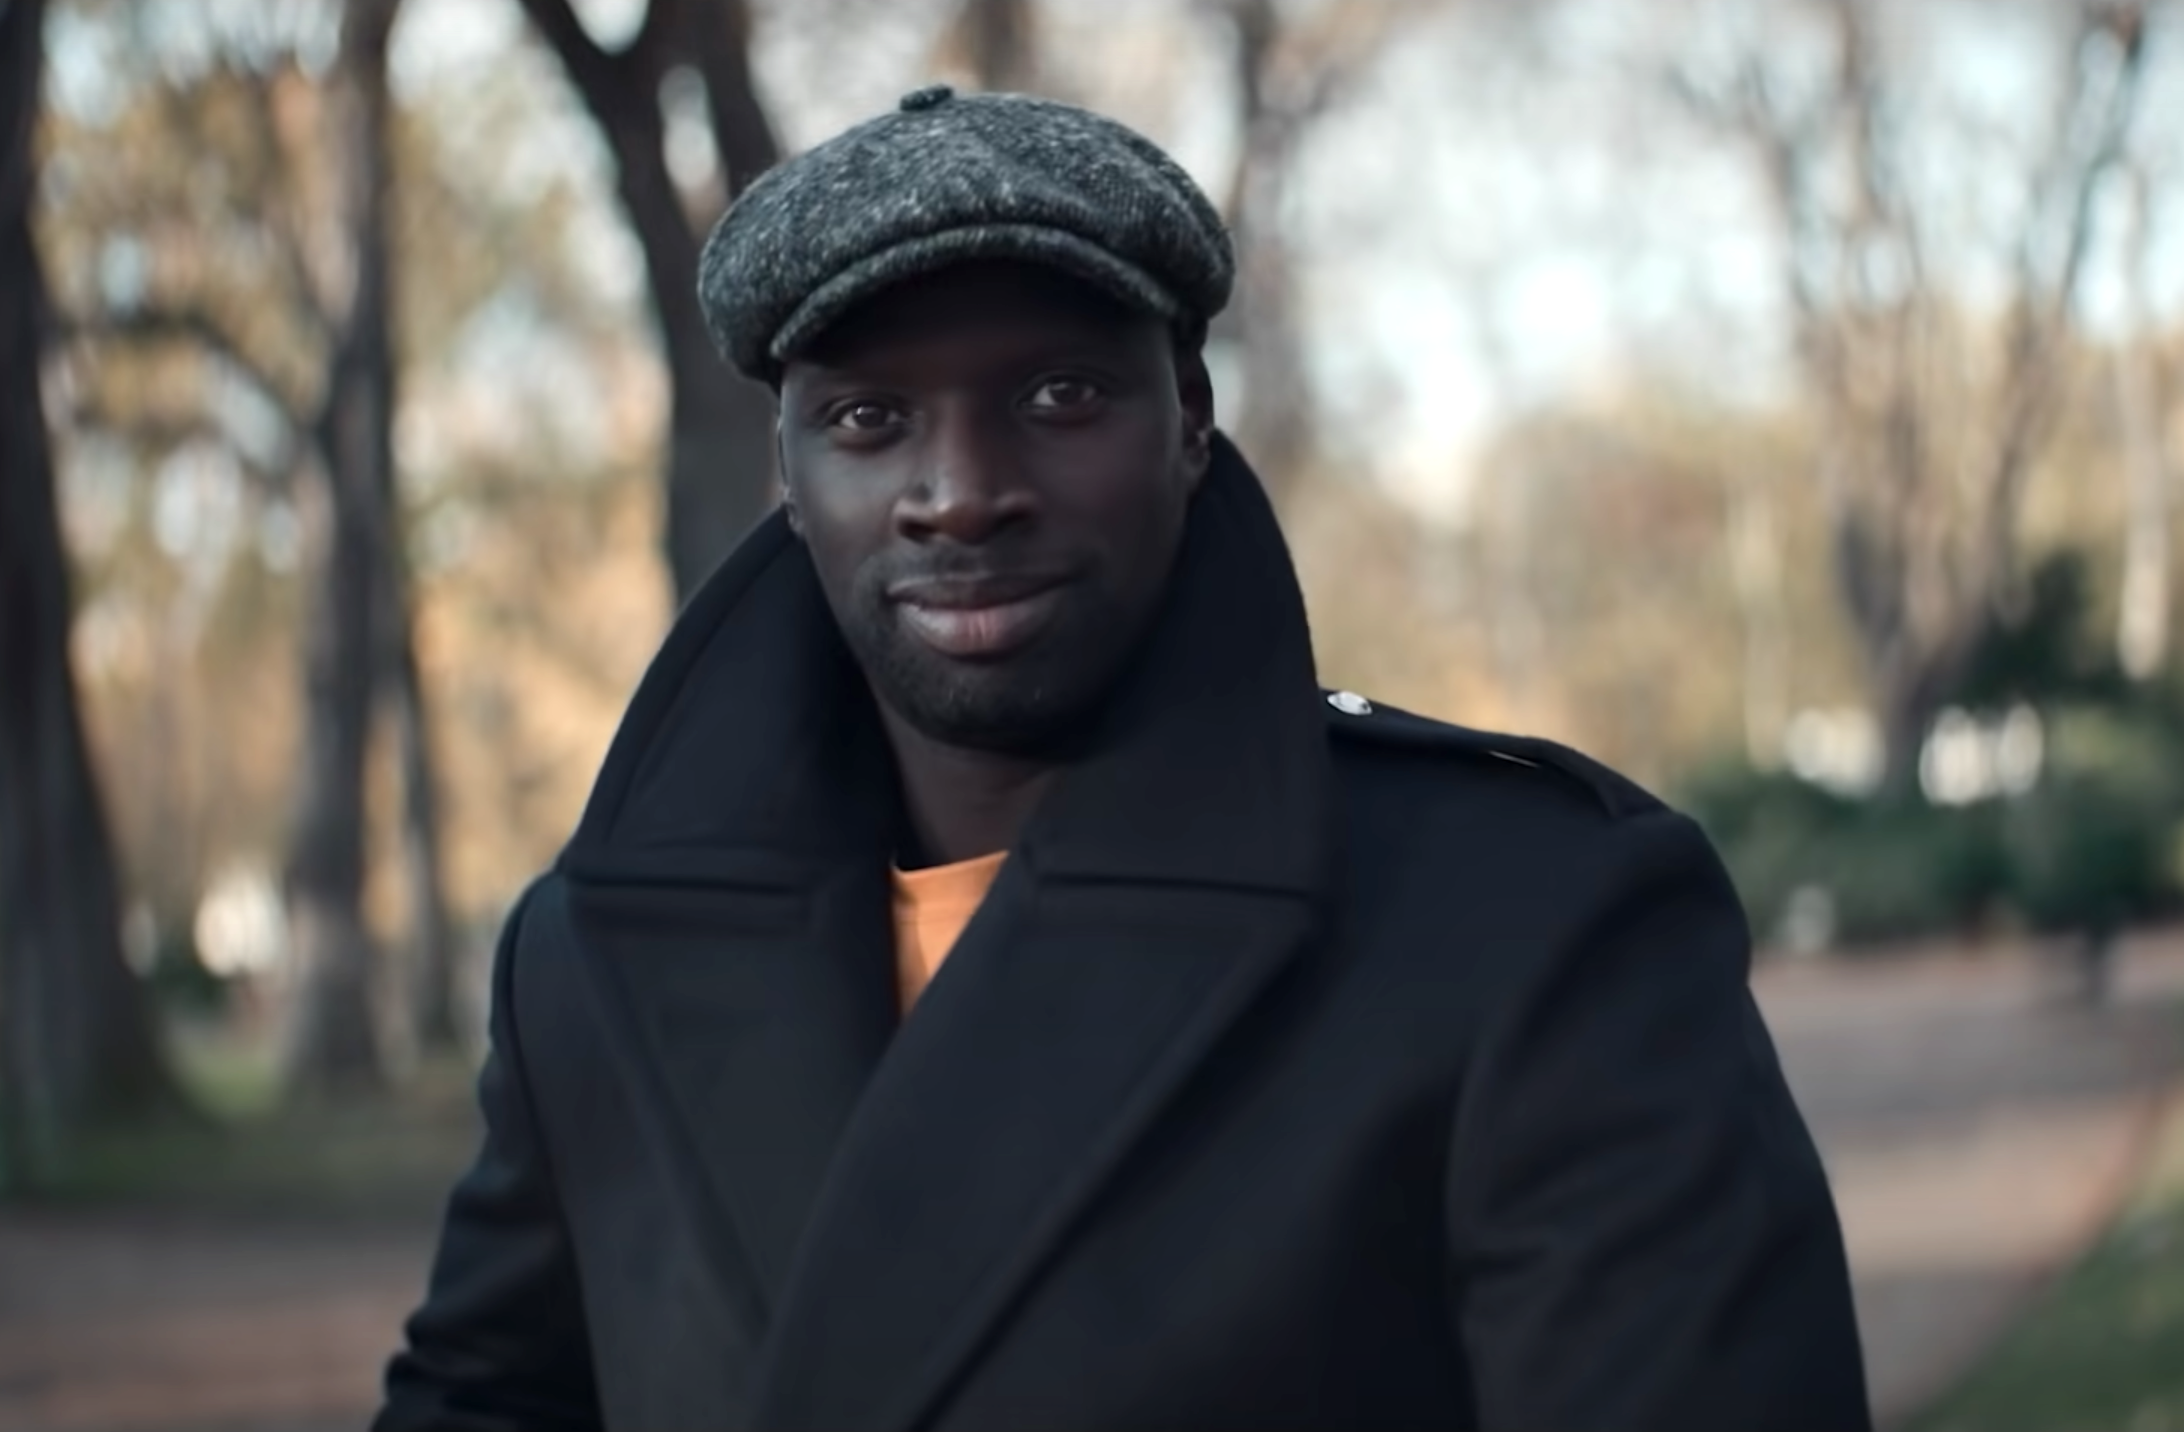 Screenshot from Lupin of Omar Sy wearing winter clothing